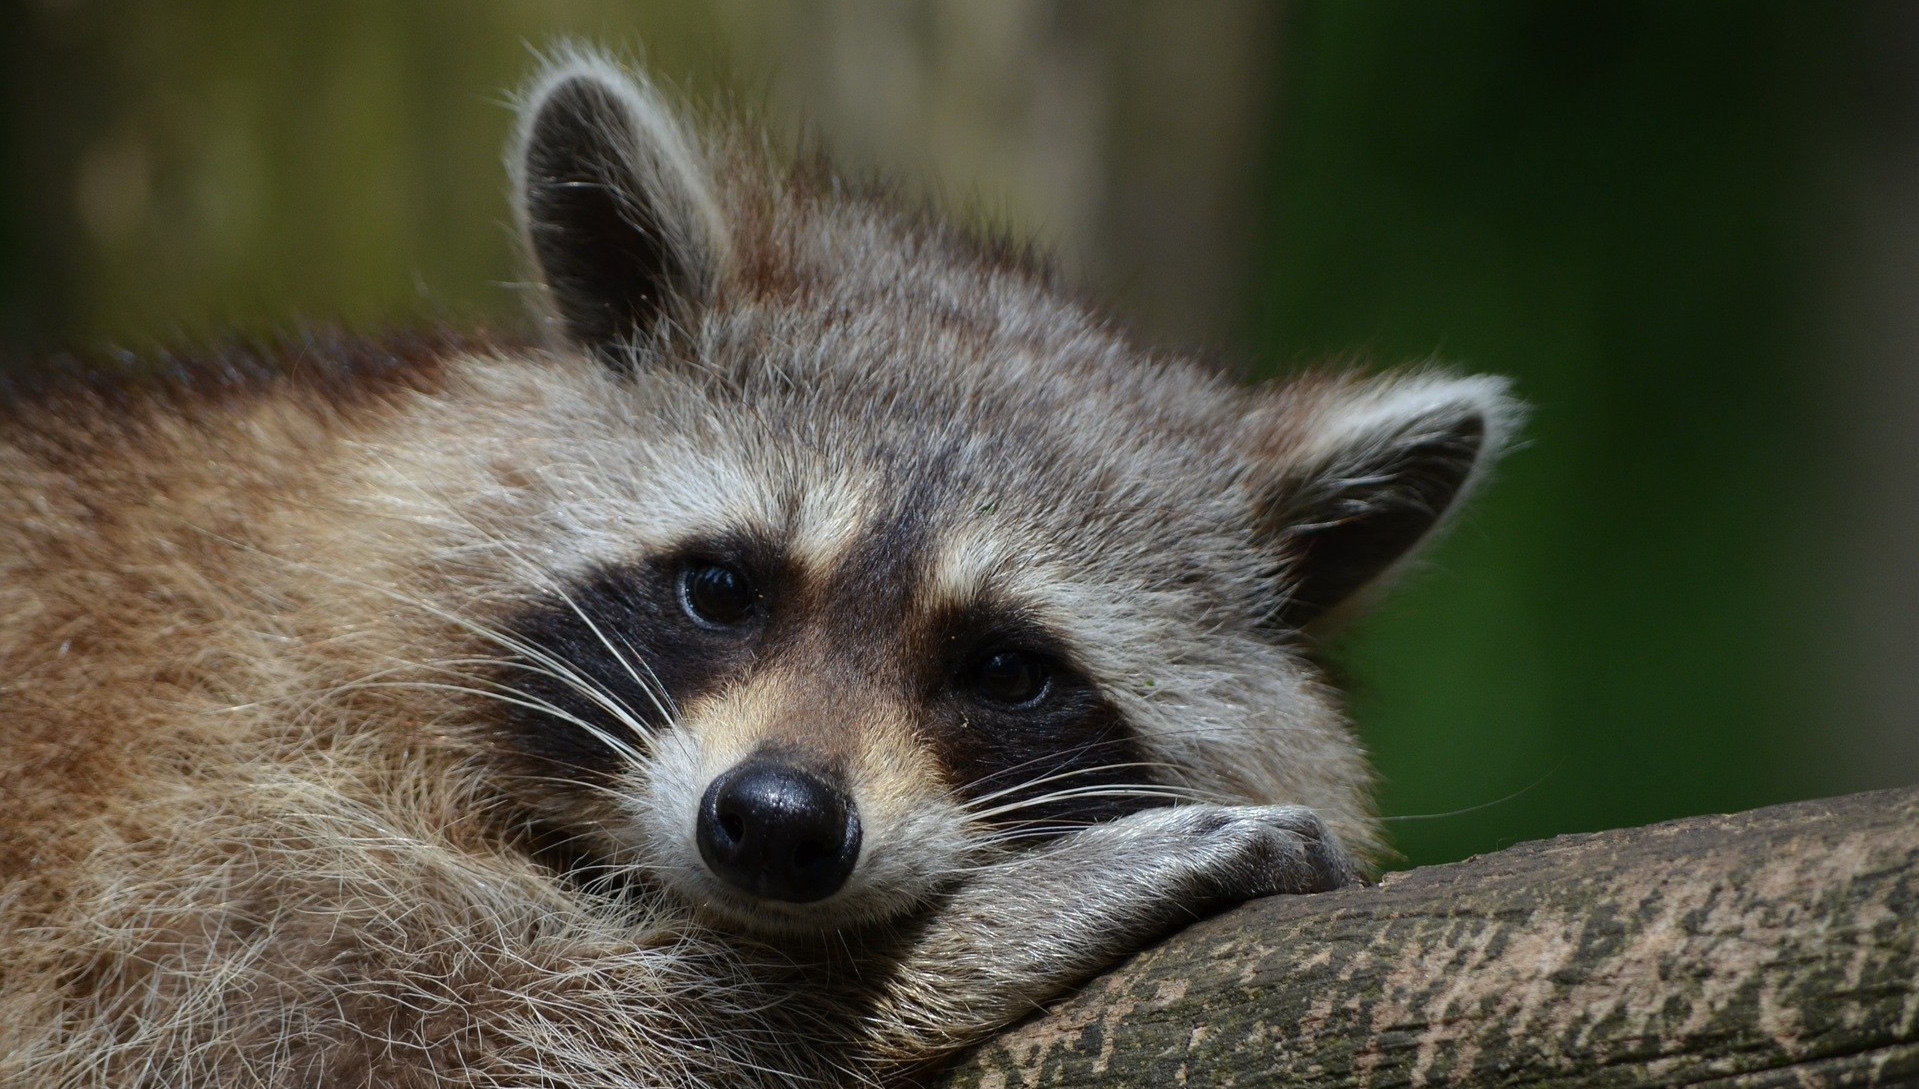 2. Series of 6 exotic animals you can legally raise at home in Poland. Raccoon